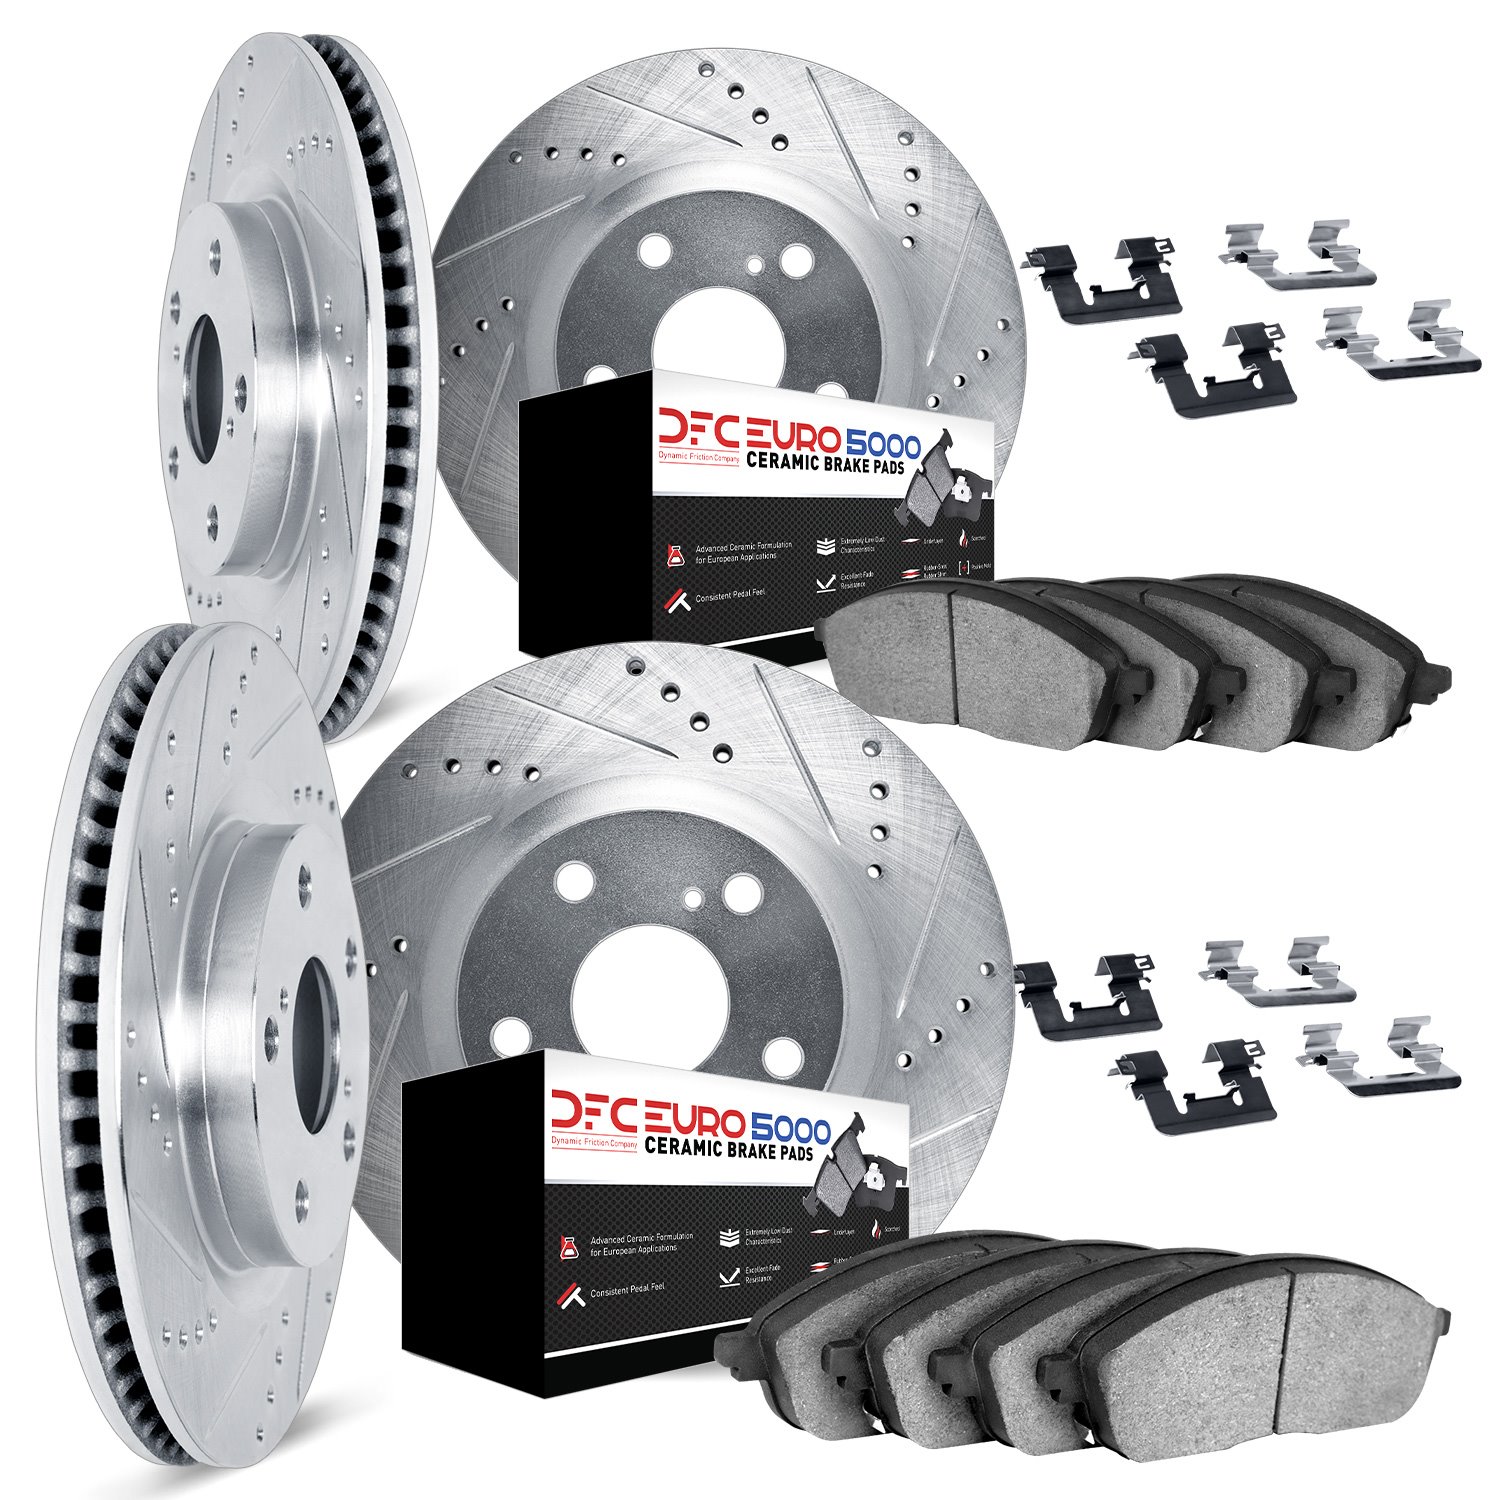 7614-31034 Drilled/Slotted Brake Rotors w/5000 Euro Ceramic Brake Pads Kit & Hardware [Silver], 2007-2018 BMW, Position: Front a